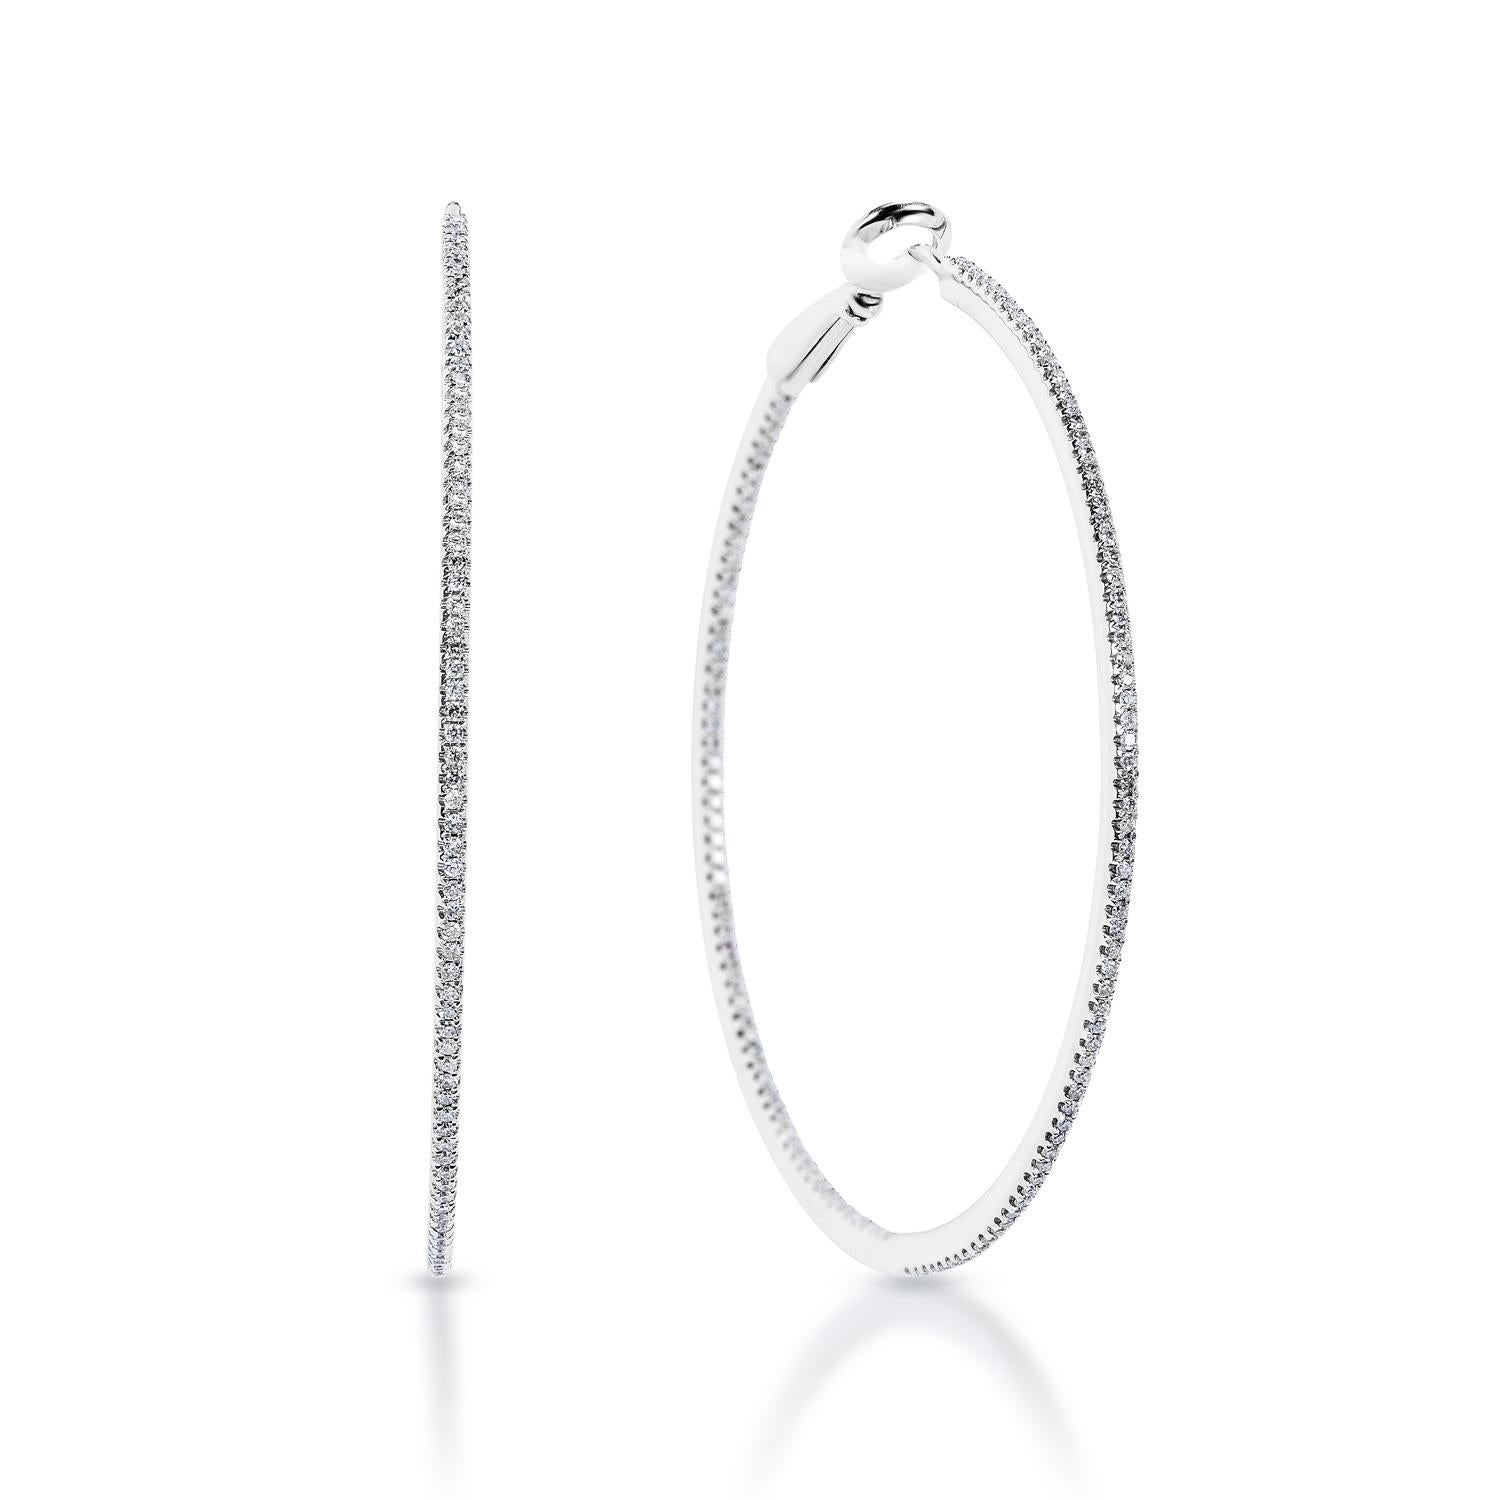 Diamond Large Hoop Earrings:

Diameter: 2 inches 
Carat Weight: 0.85 Carats
Shape: Round Brilliant Cut
Metal: 14 Karat White Gold
Style: Large Hoop Earrings